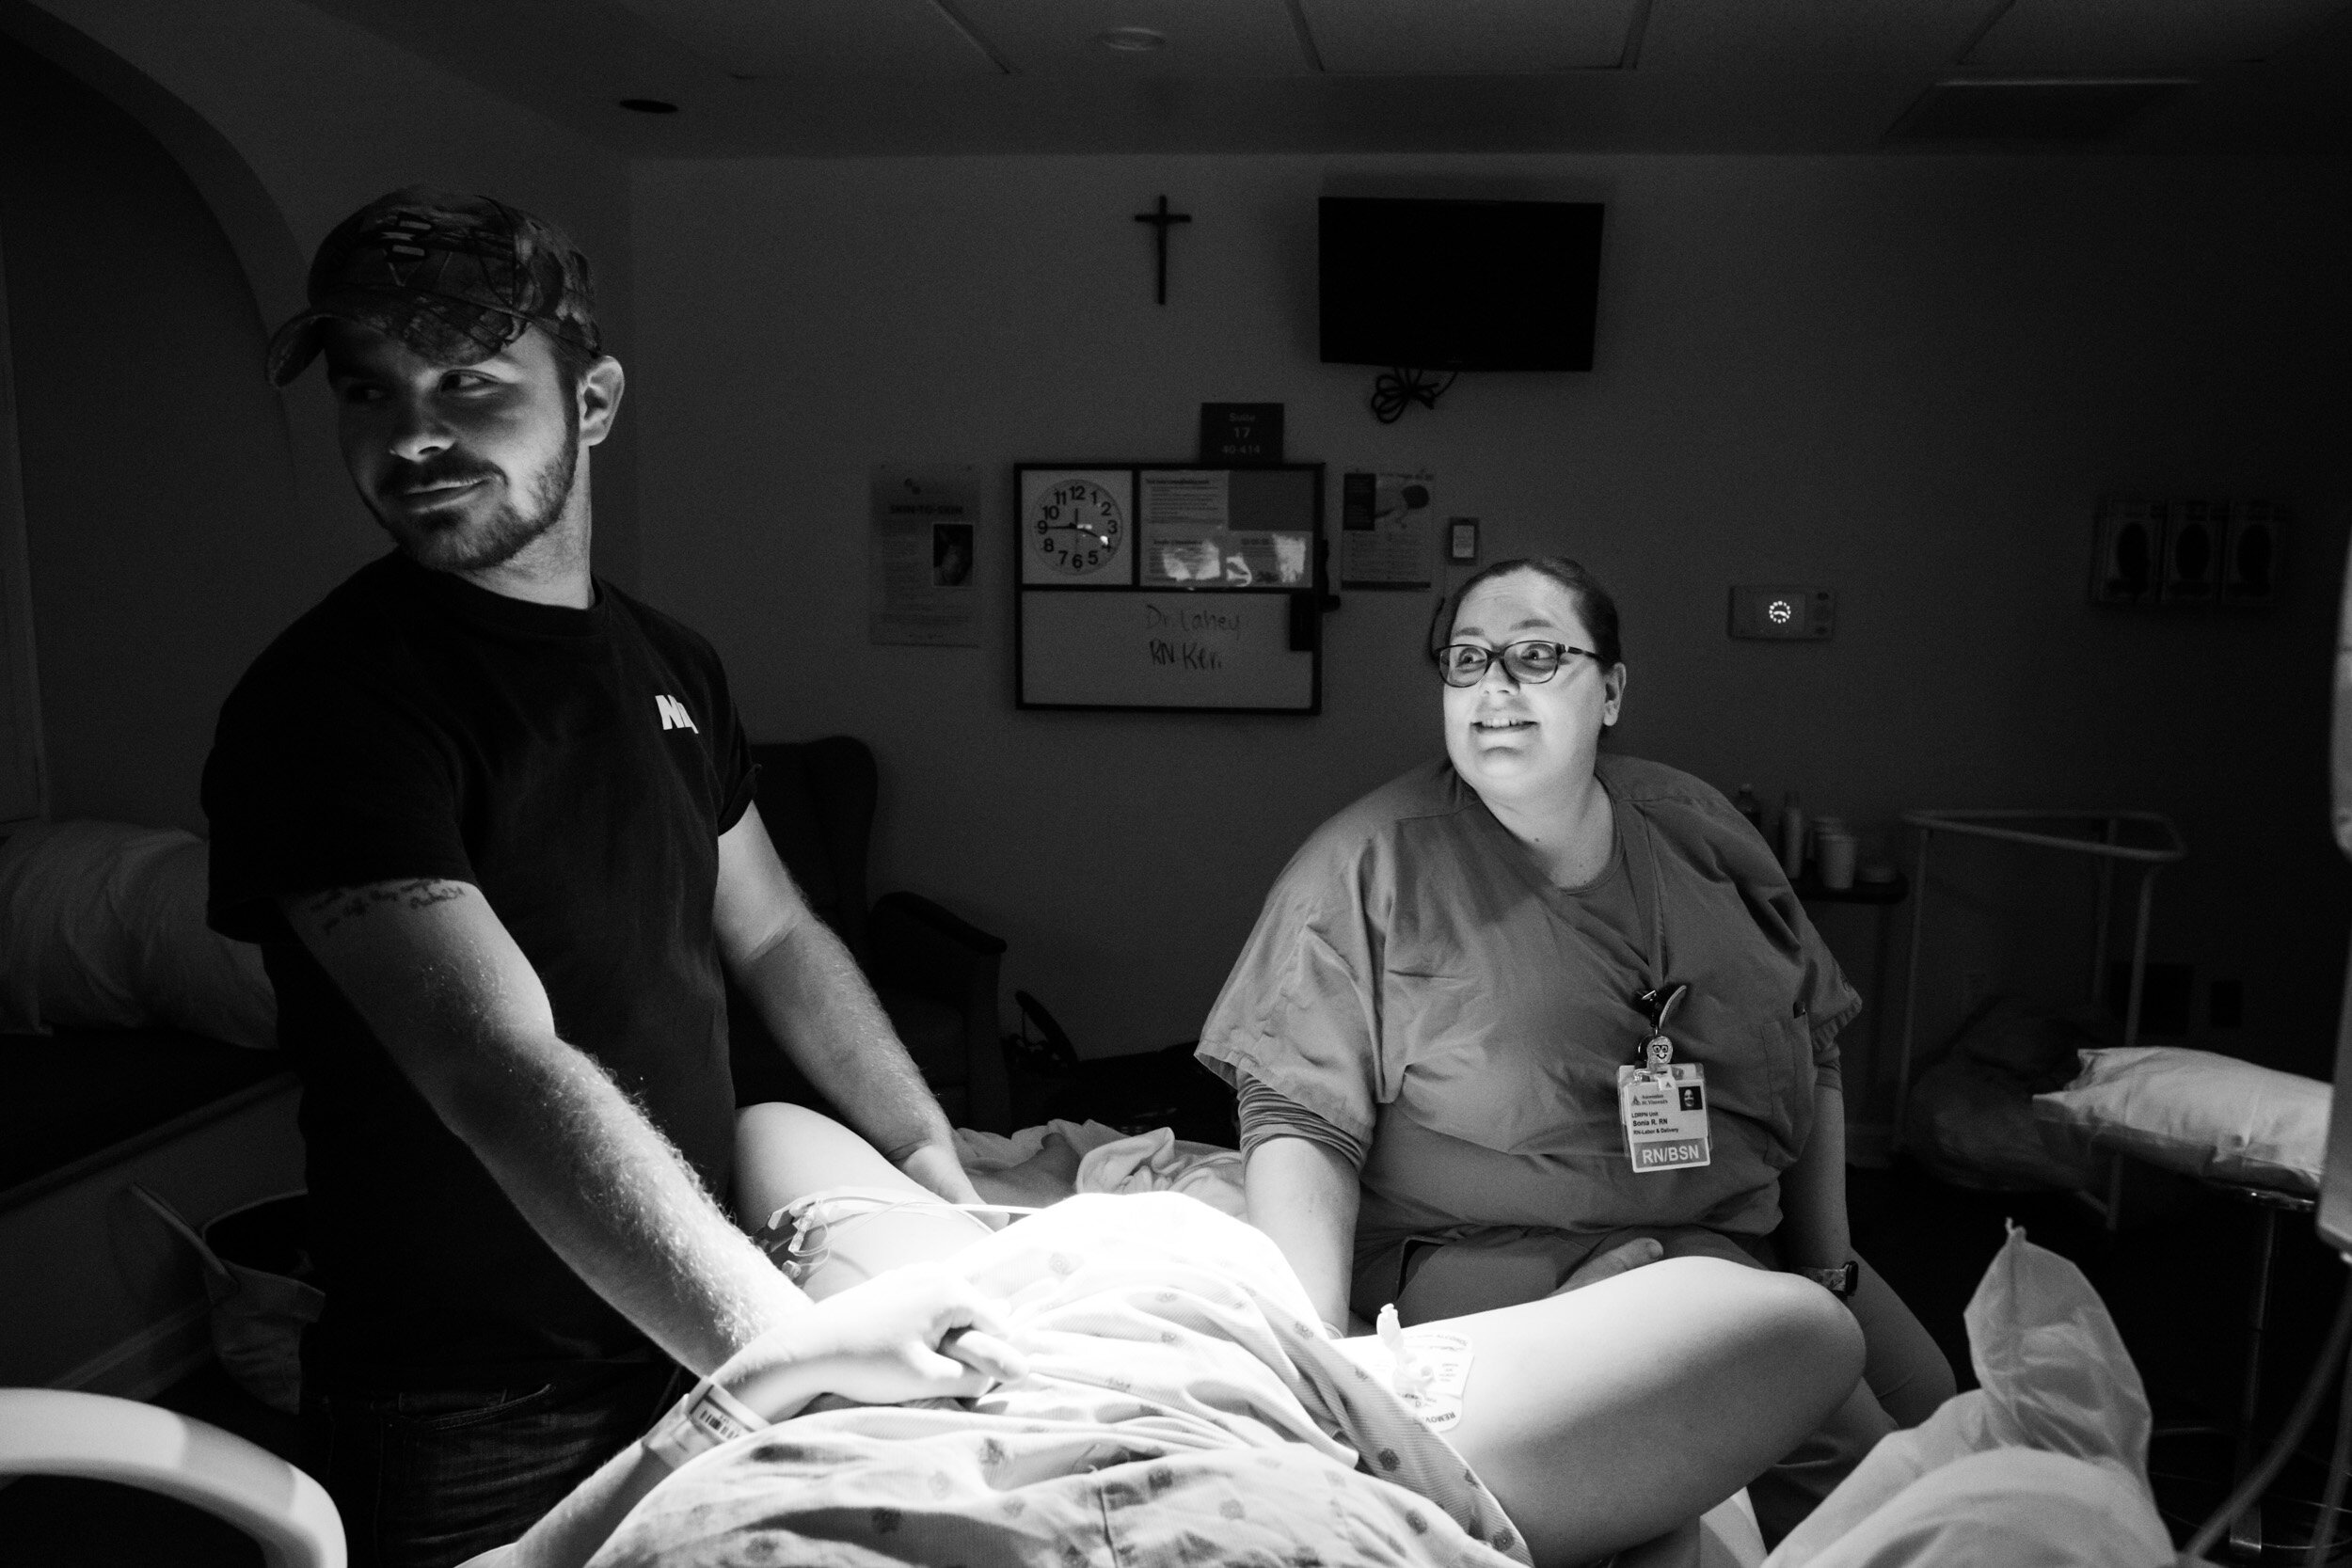 husband and nurse watching the hospital monitors for the next contraction